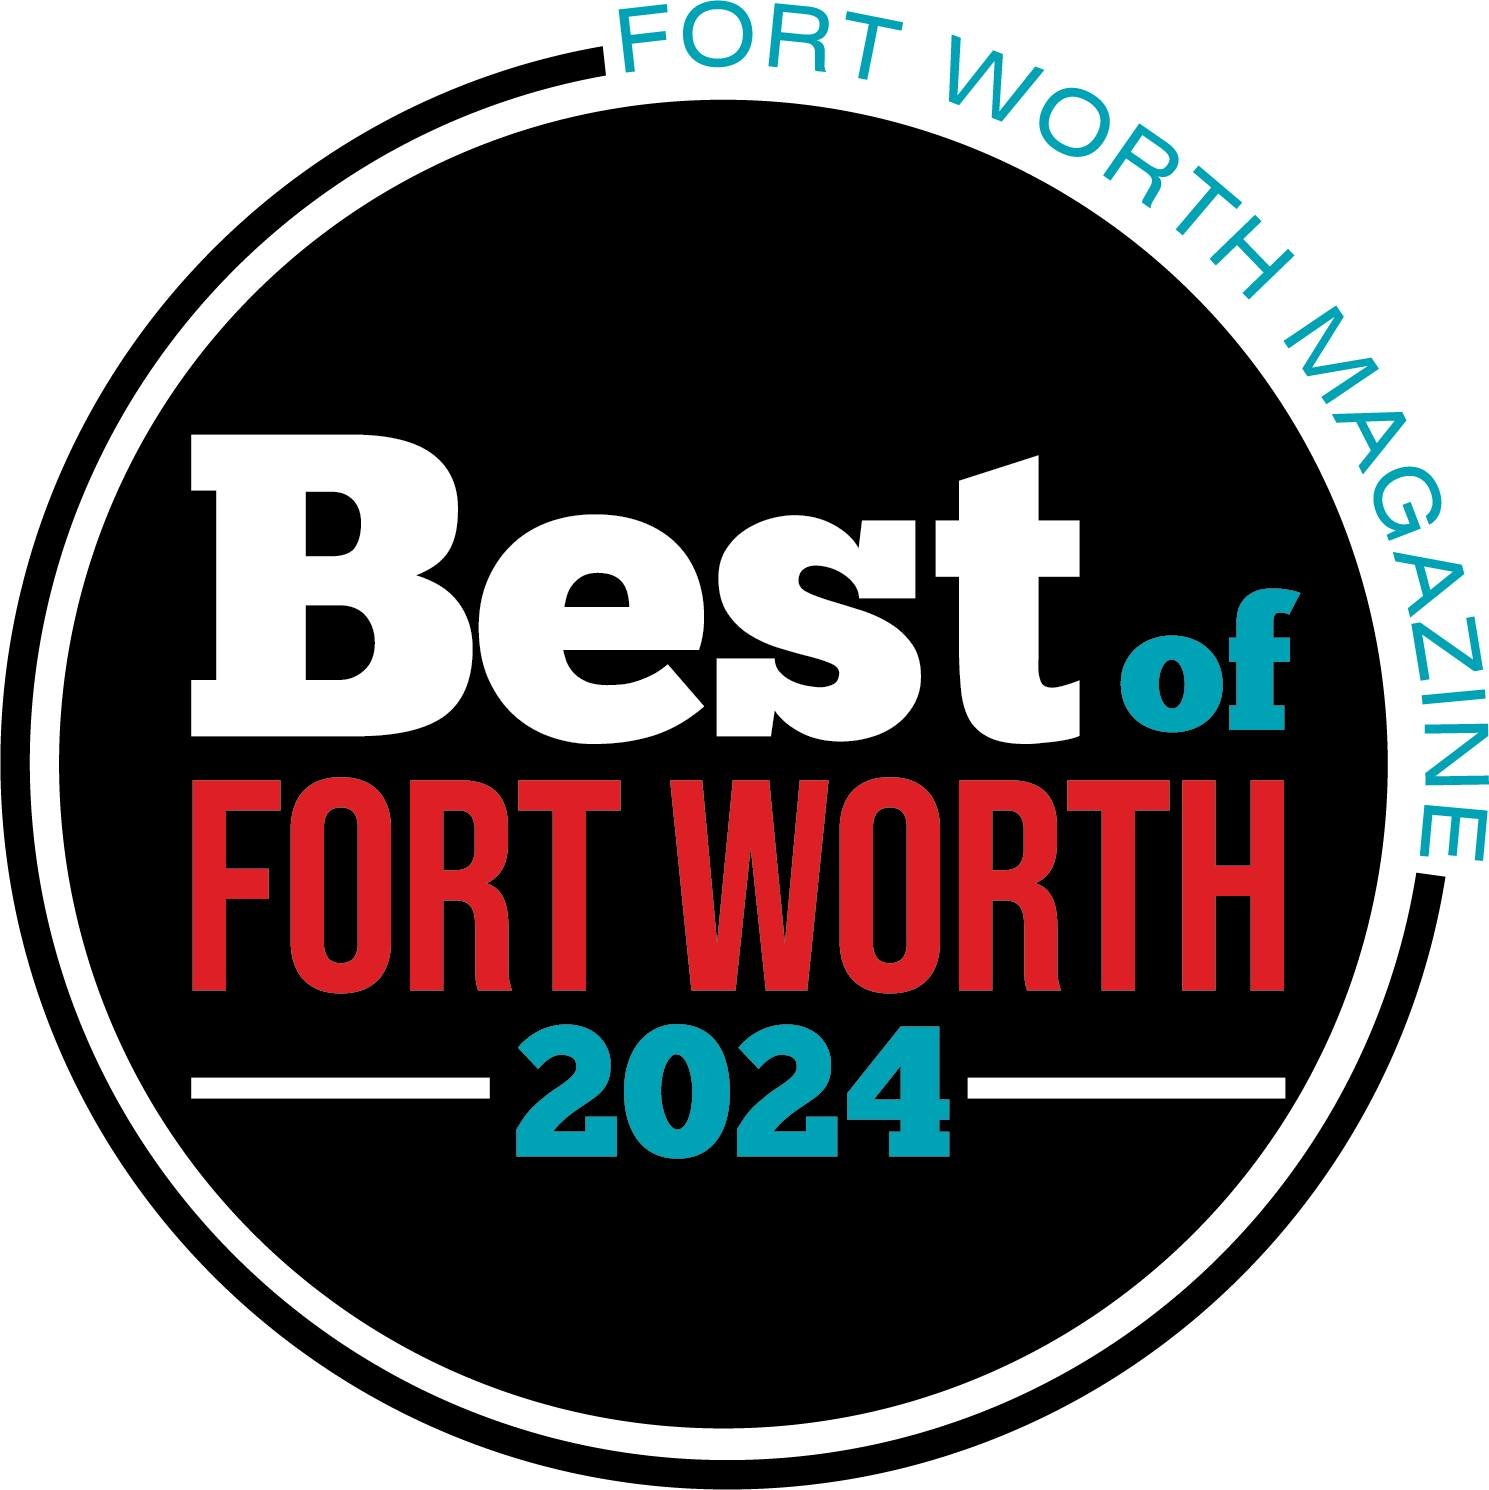 ✨ Celebrating a Milestone! ✨ We did it! Rosen House Inn is the proud recipient of the &quot;Best of Fort Worth&quot; award by @FortWorthMag! This accolade is a testament to our passion for hospitality and our love for Fort Worth's vibrant culture. We